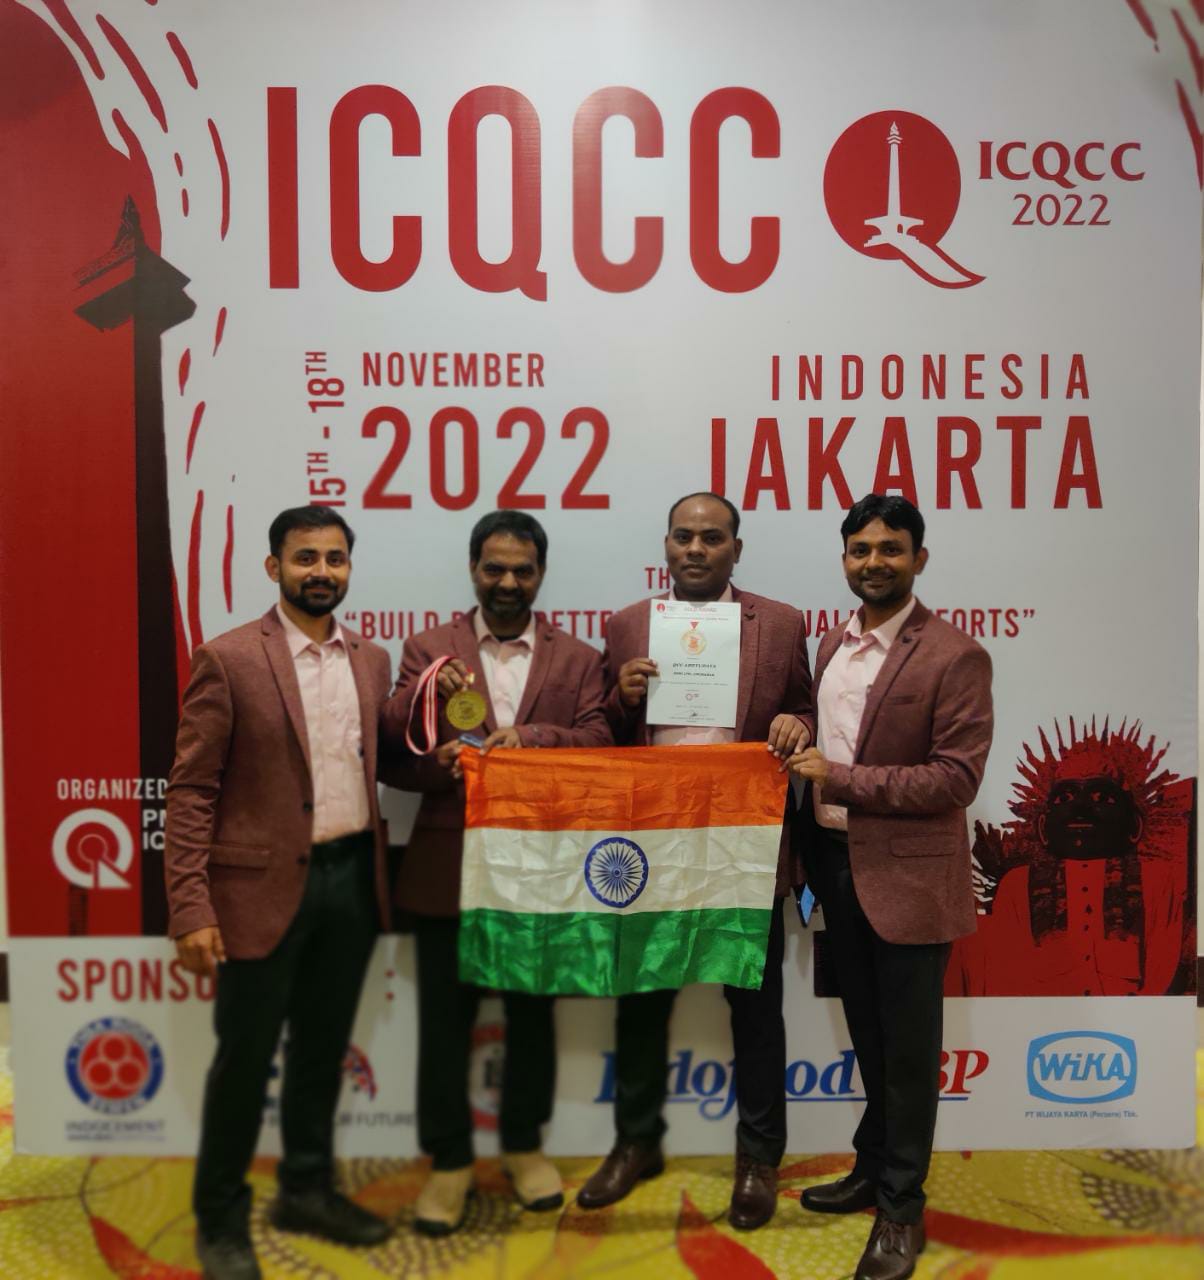 NTPC team wins GOLD award in the 47th ICQCC-2022 in Jakarta